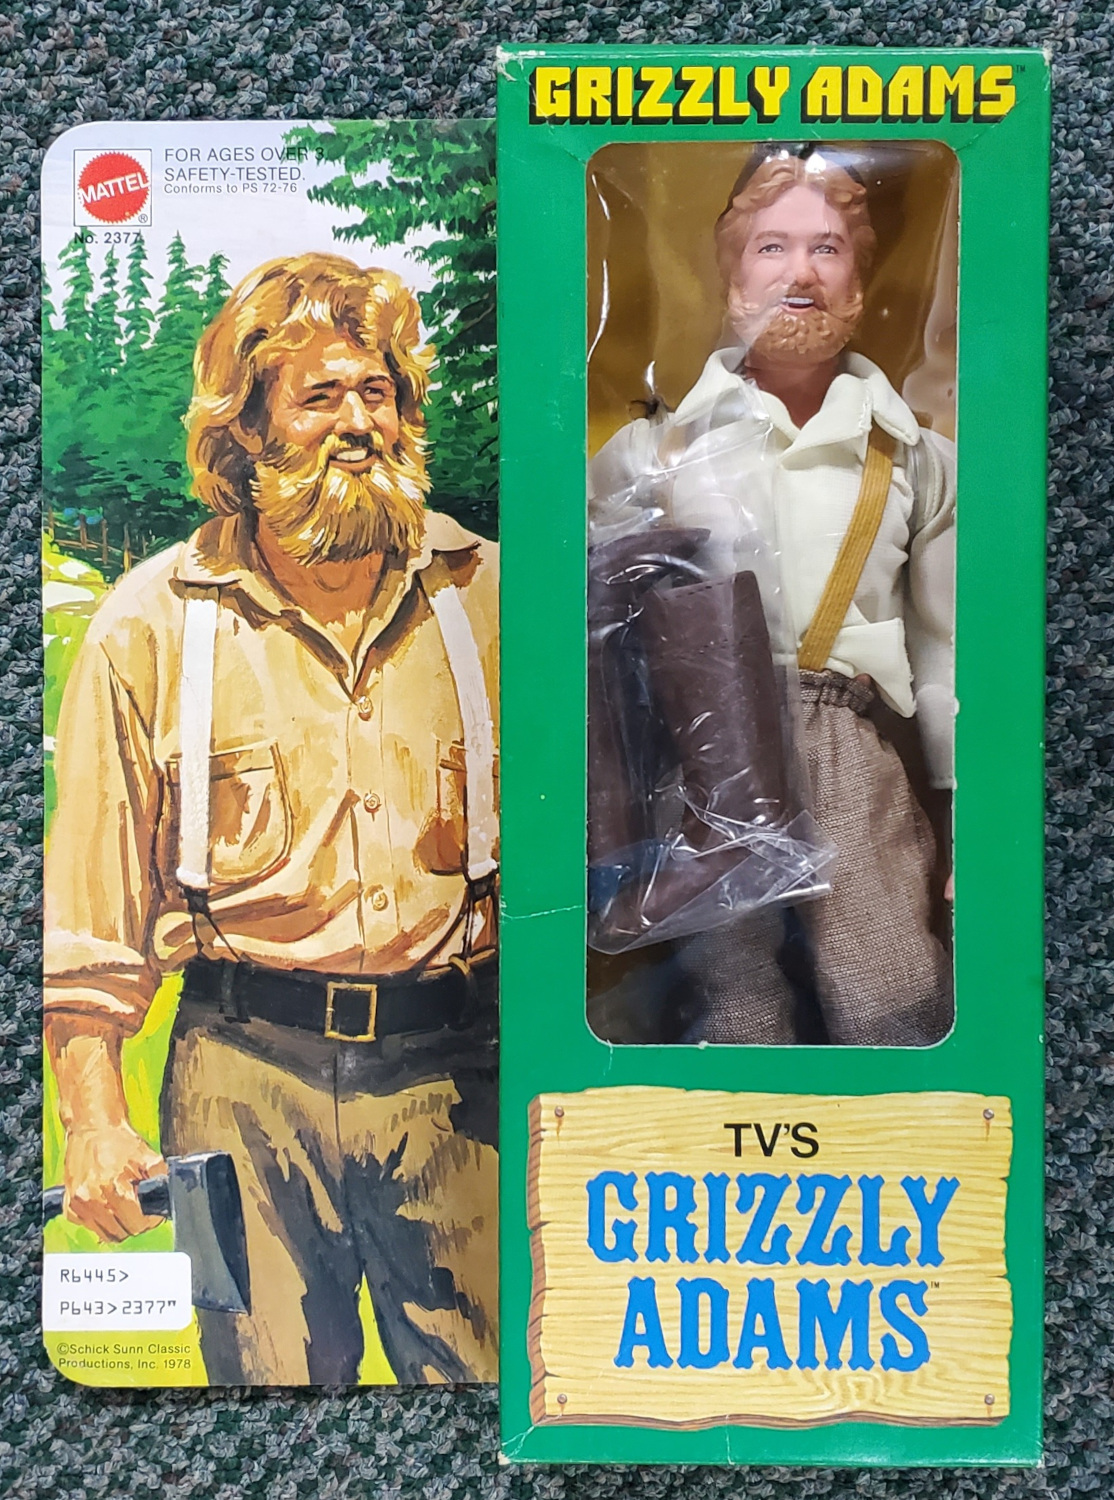 MIB 1978 Mattel Grizzly Adams Action Figure: Factory Sealed 1